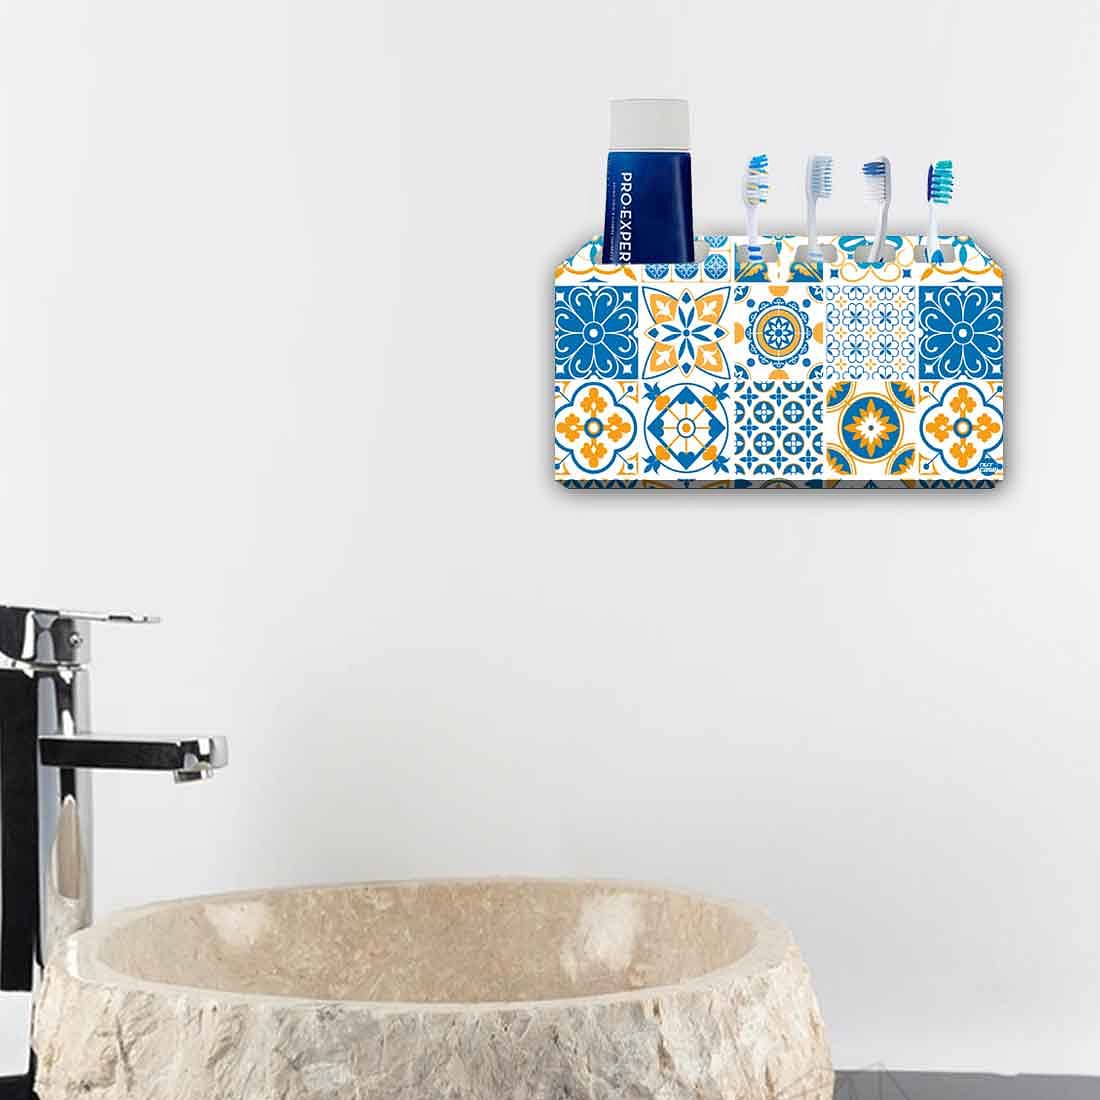 Toothbrush Holder Wall Mounted -Love from Lisbon Nutcase